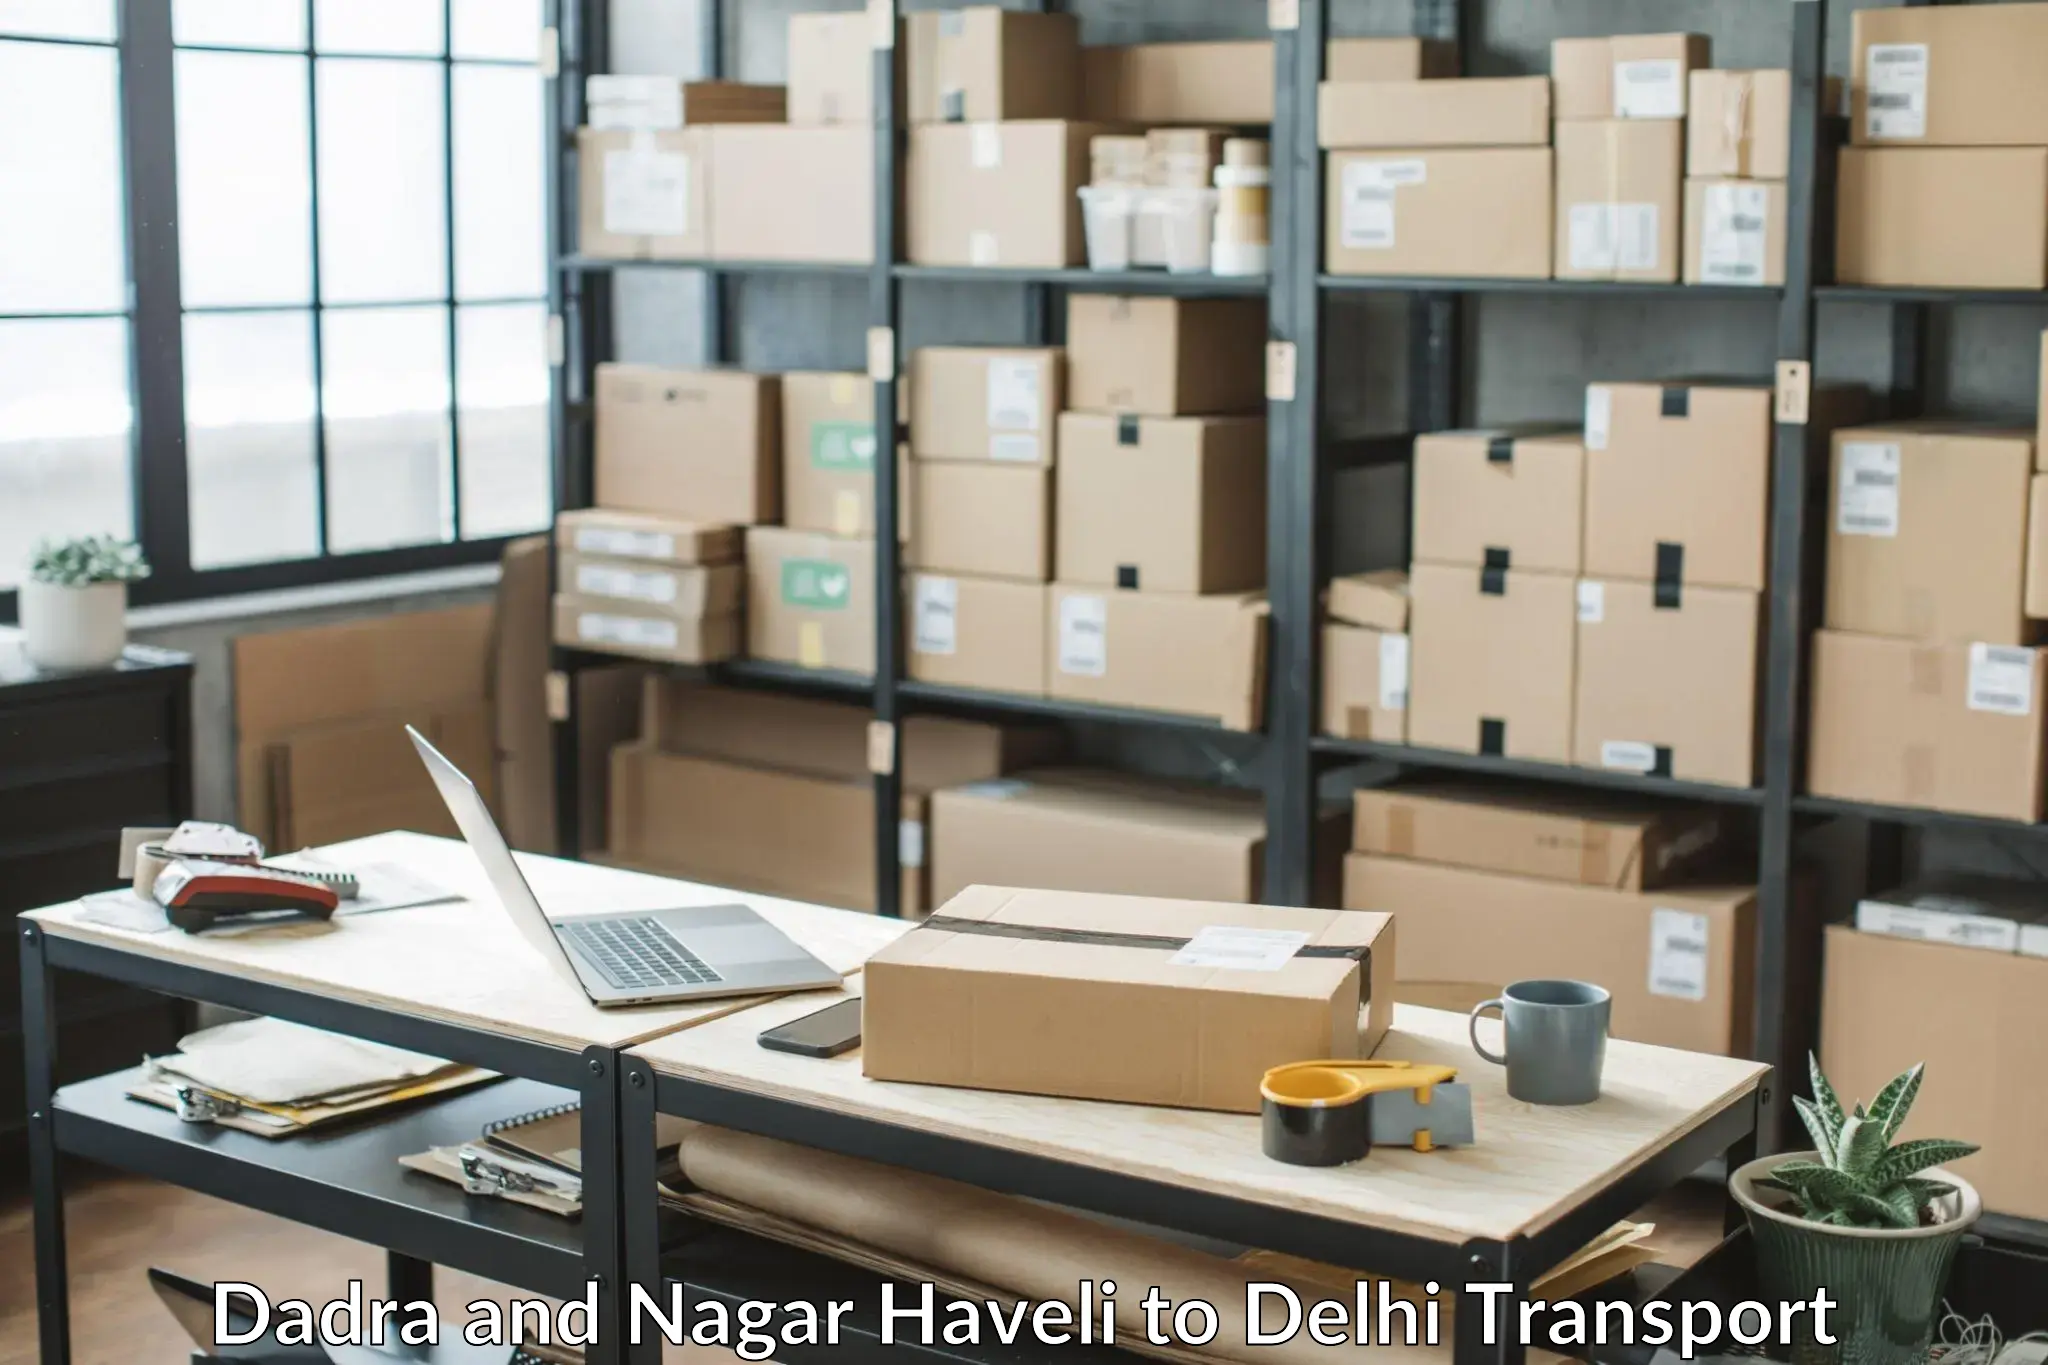 Nationwide transport services Dadra and Nagar Haveli to NCR